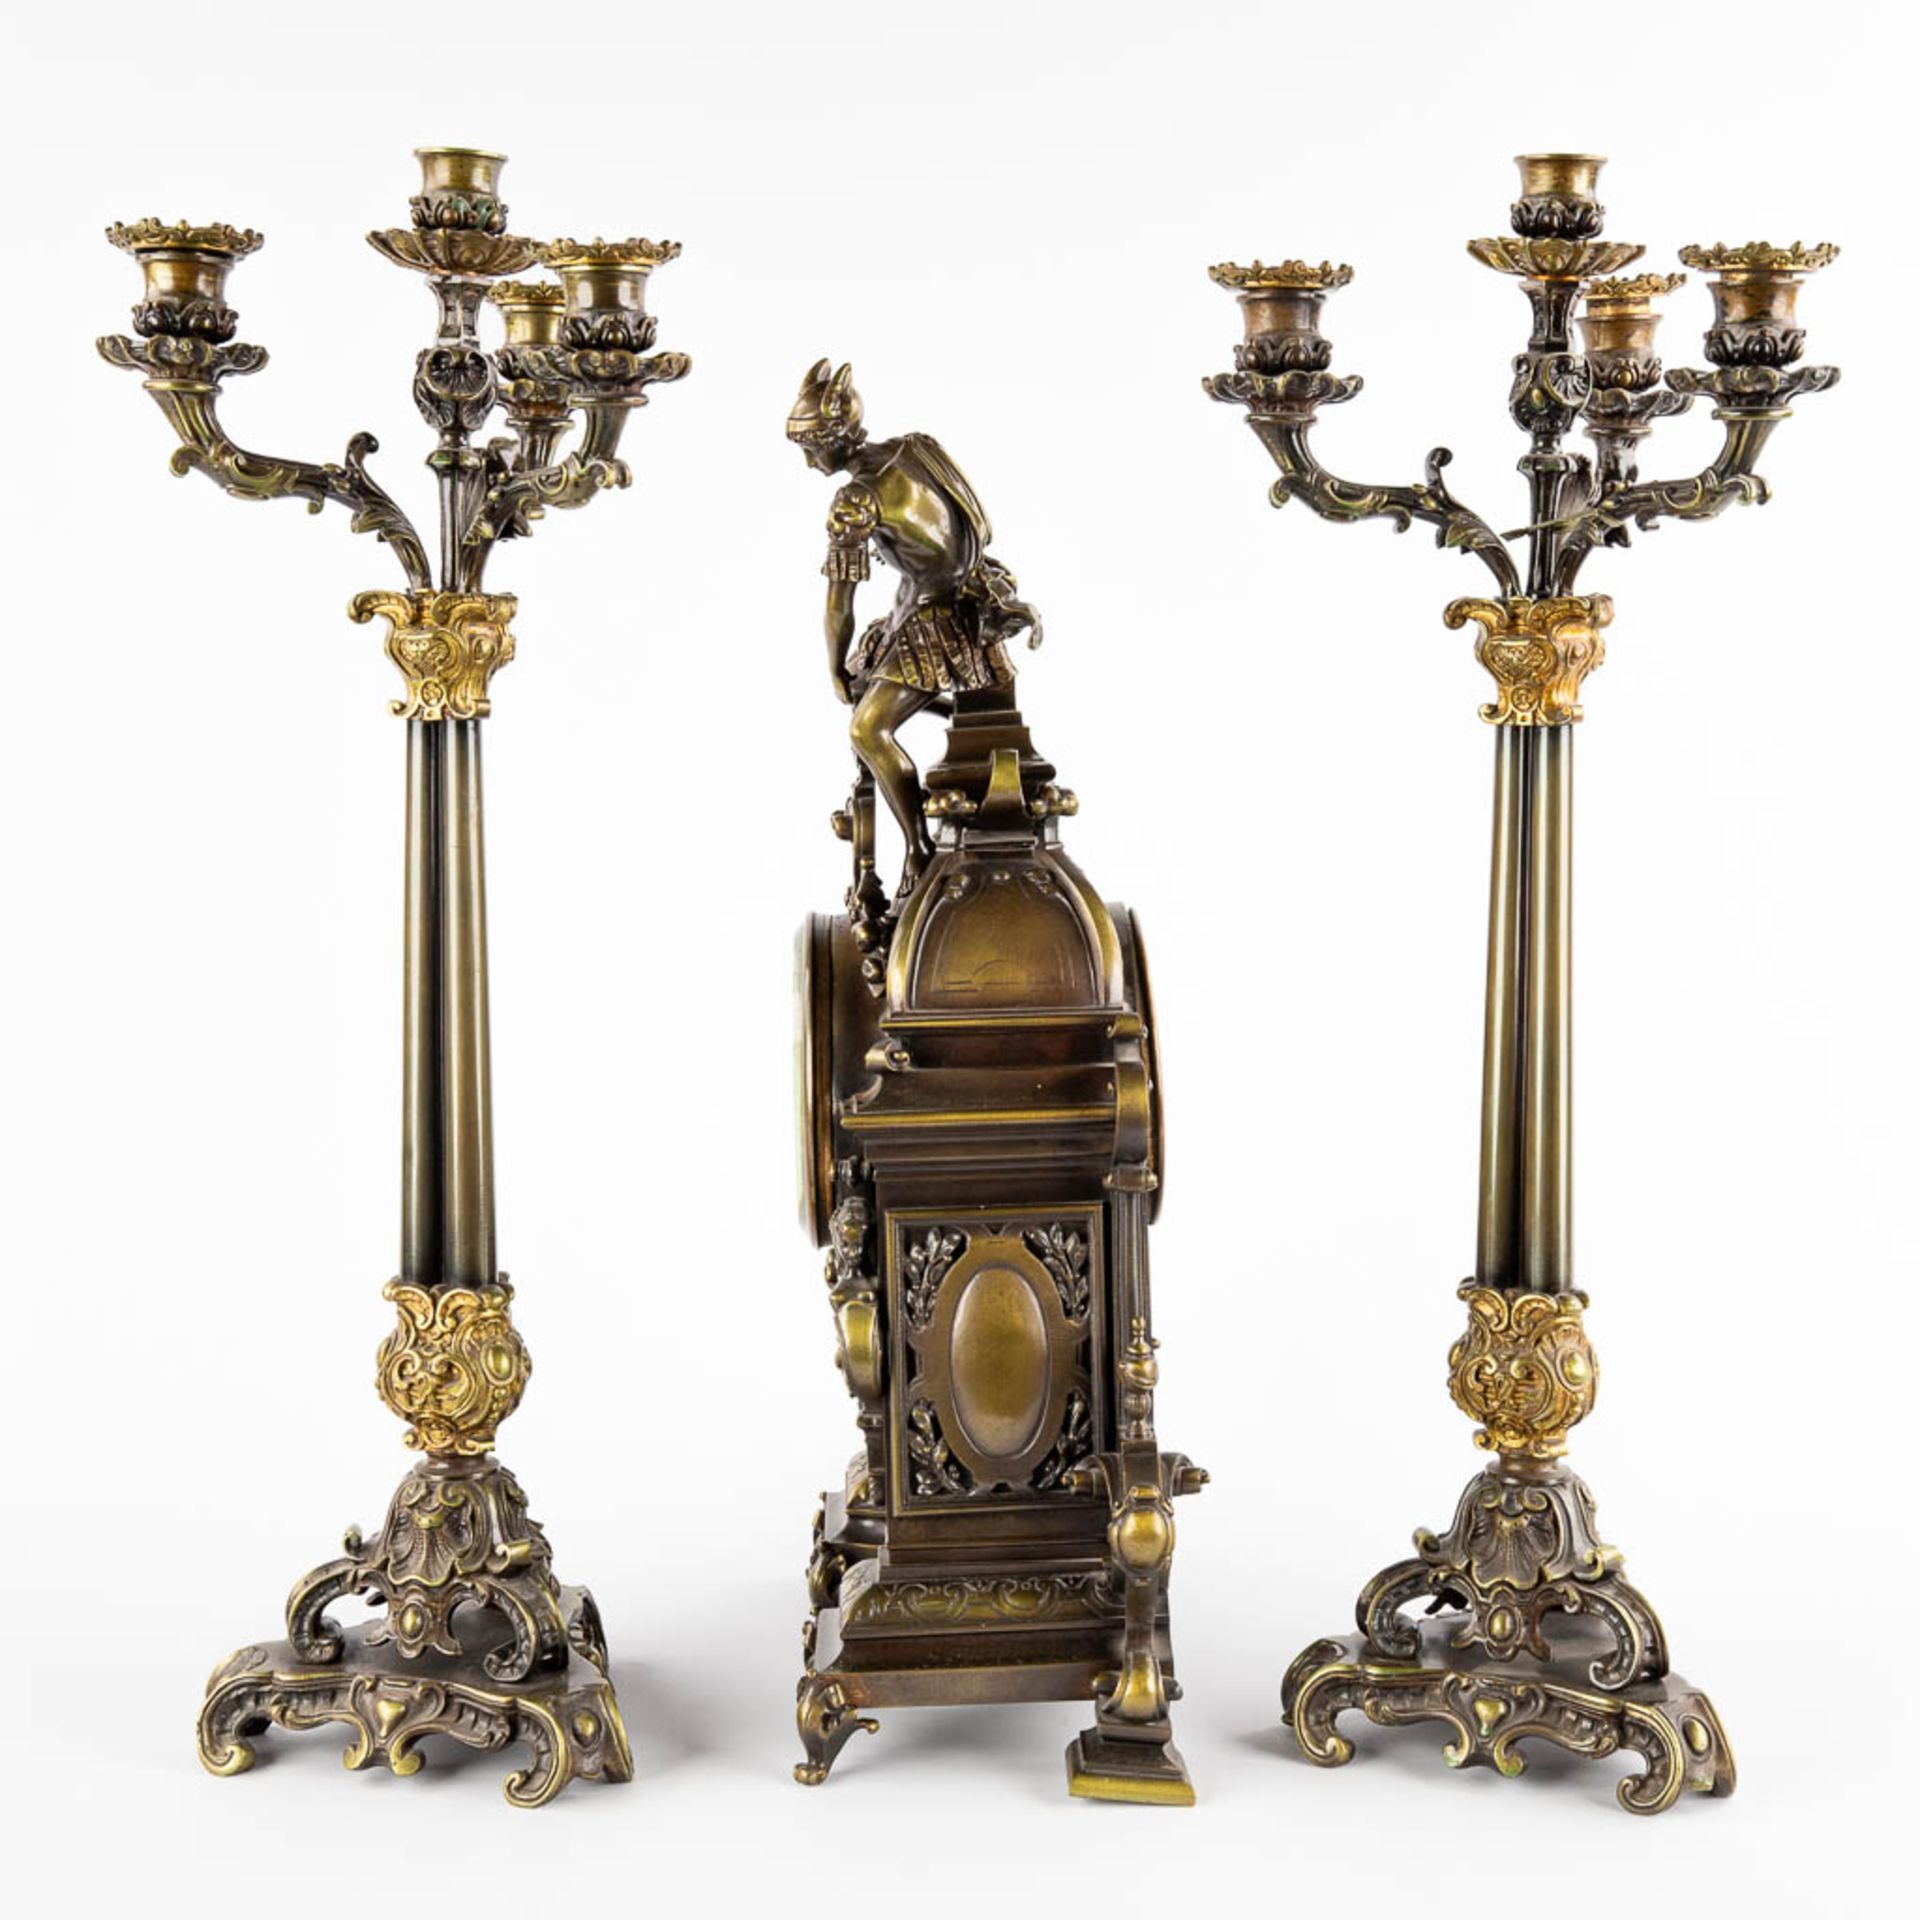 A three-piece mantle garniture clock and candelabra. Clock with an image of Mercury/Hermès. 19th C. - Image 7 of 14